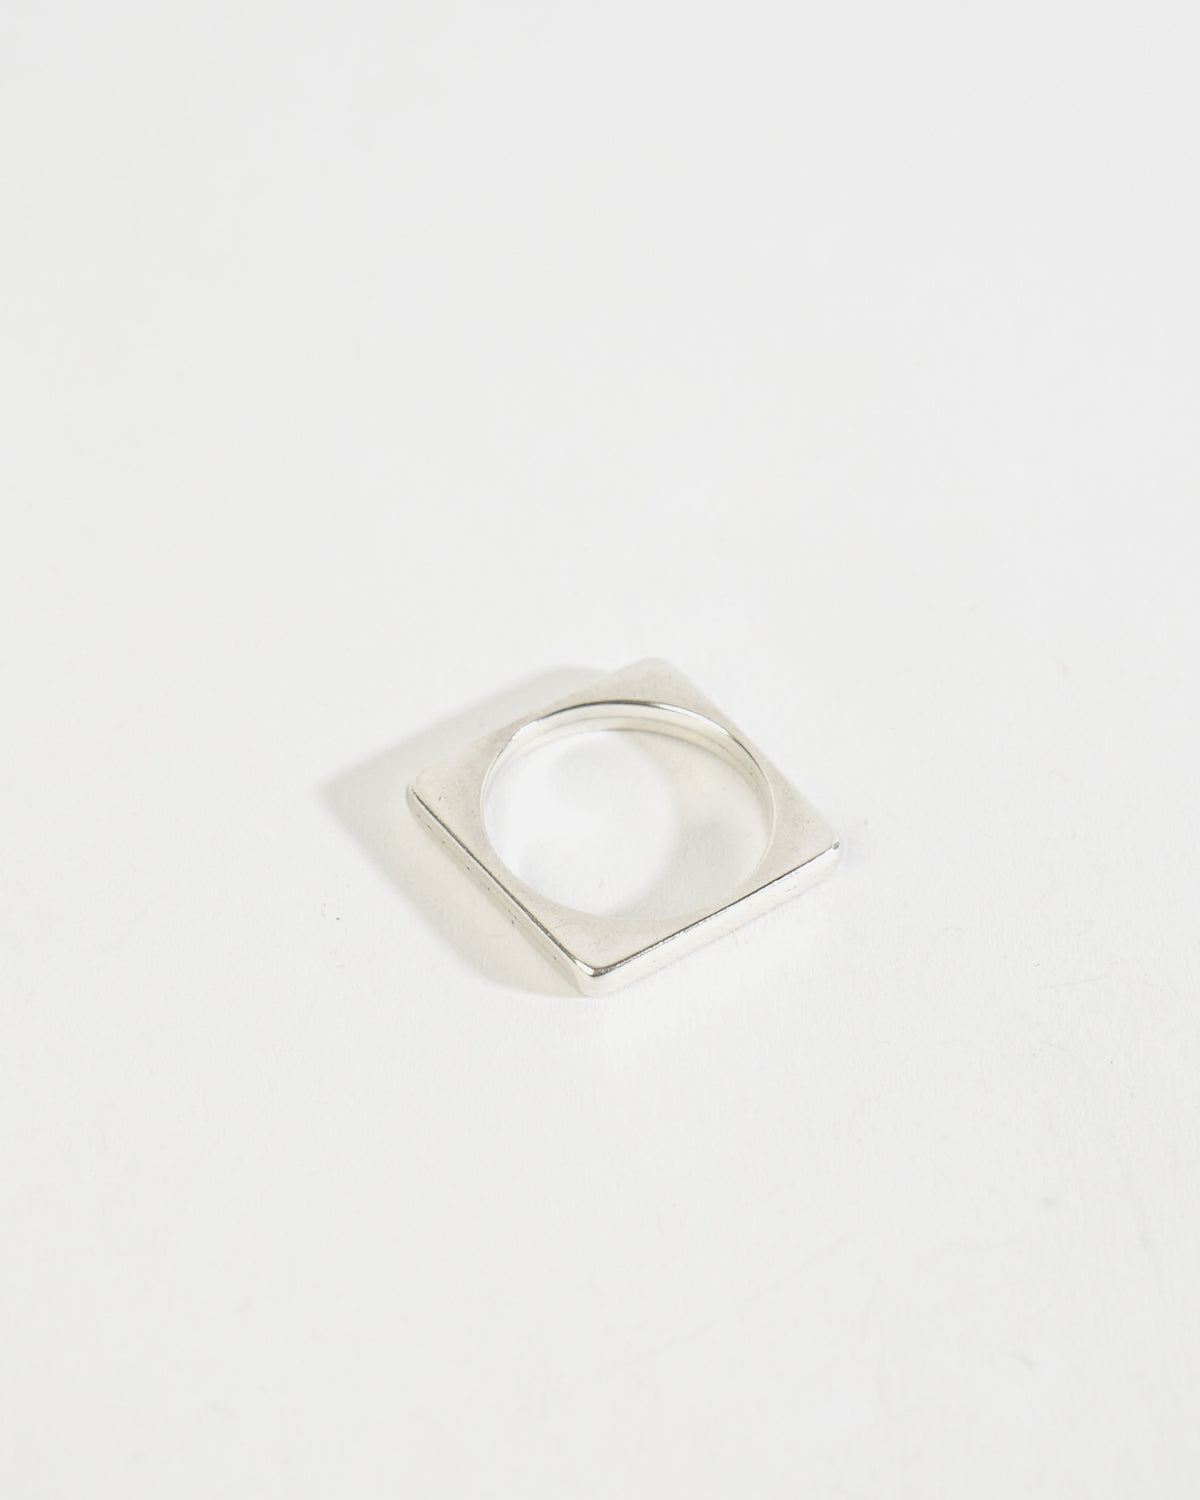 Silver Square Ring / size: 8